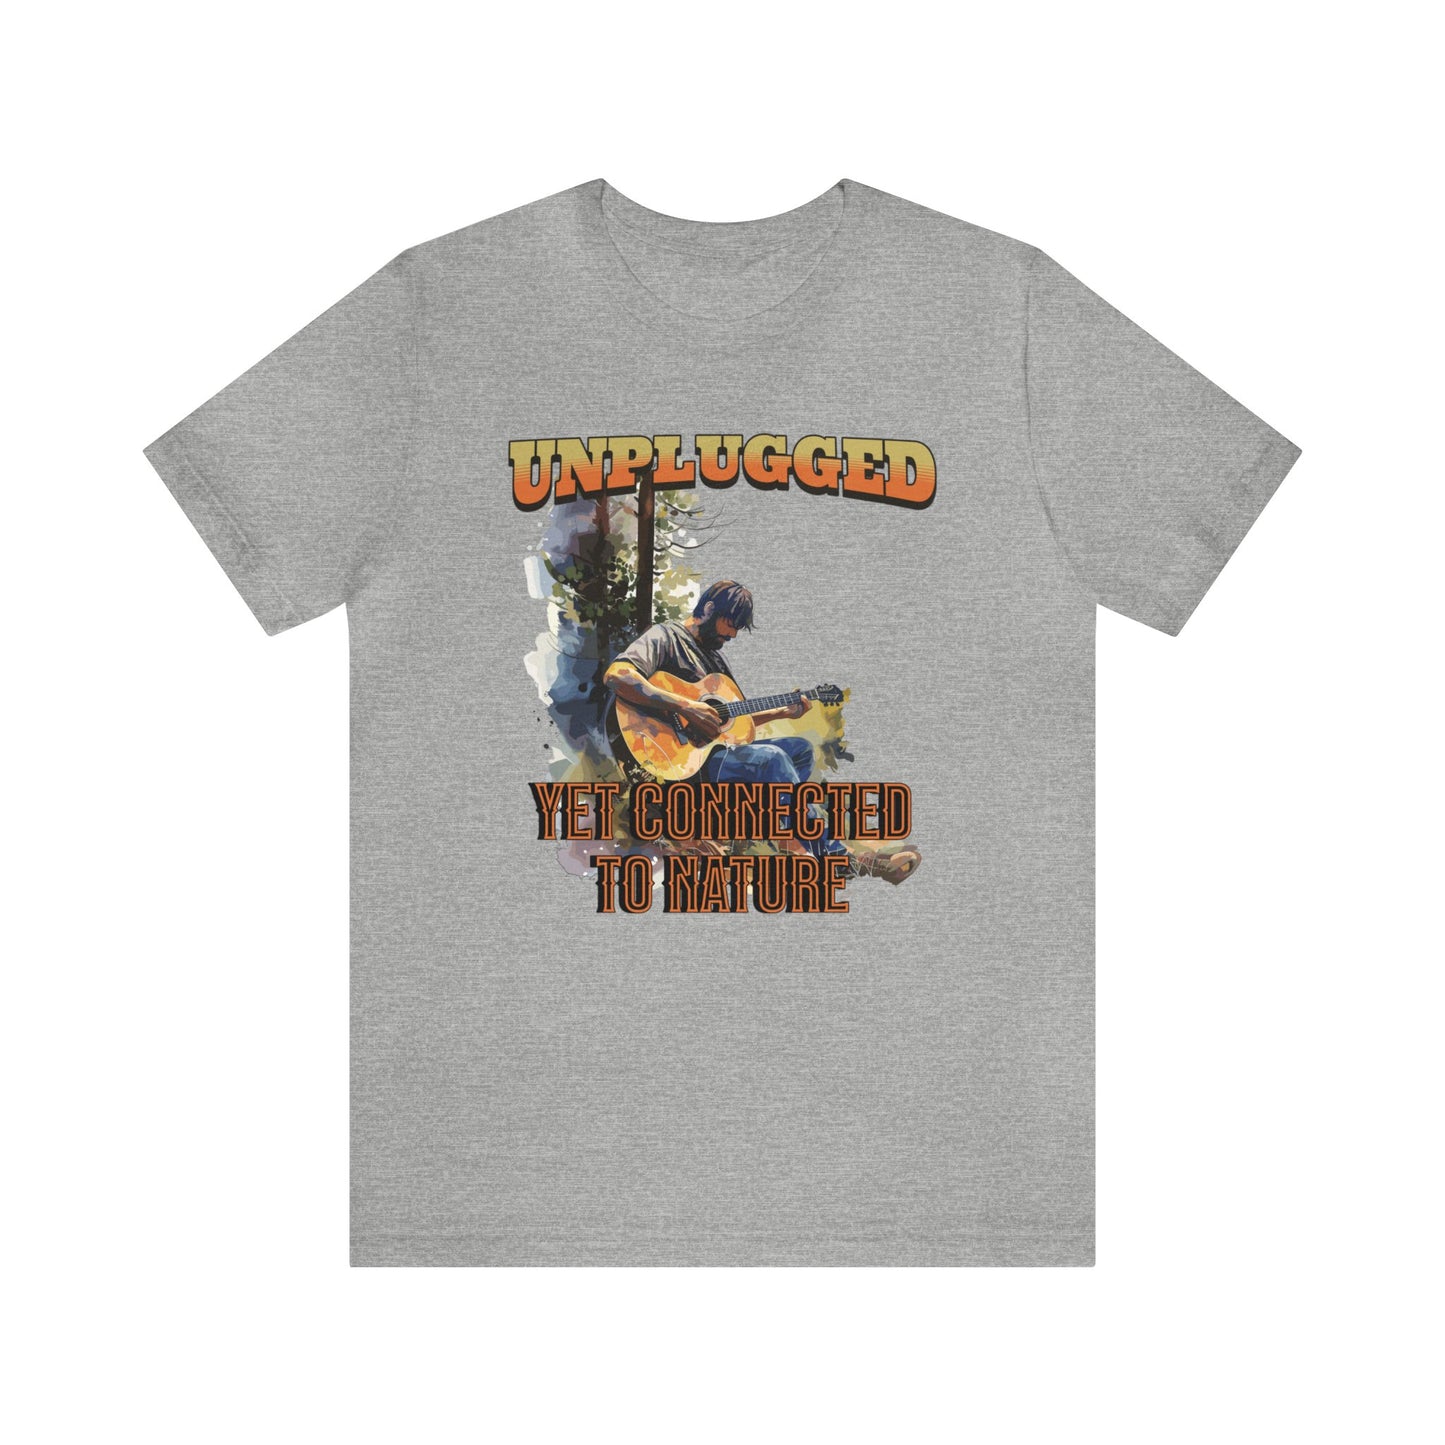 Unplugged, Yet Connected to Nature T-shirt.